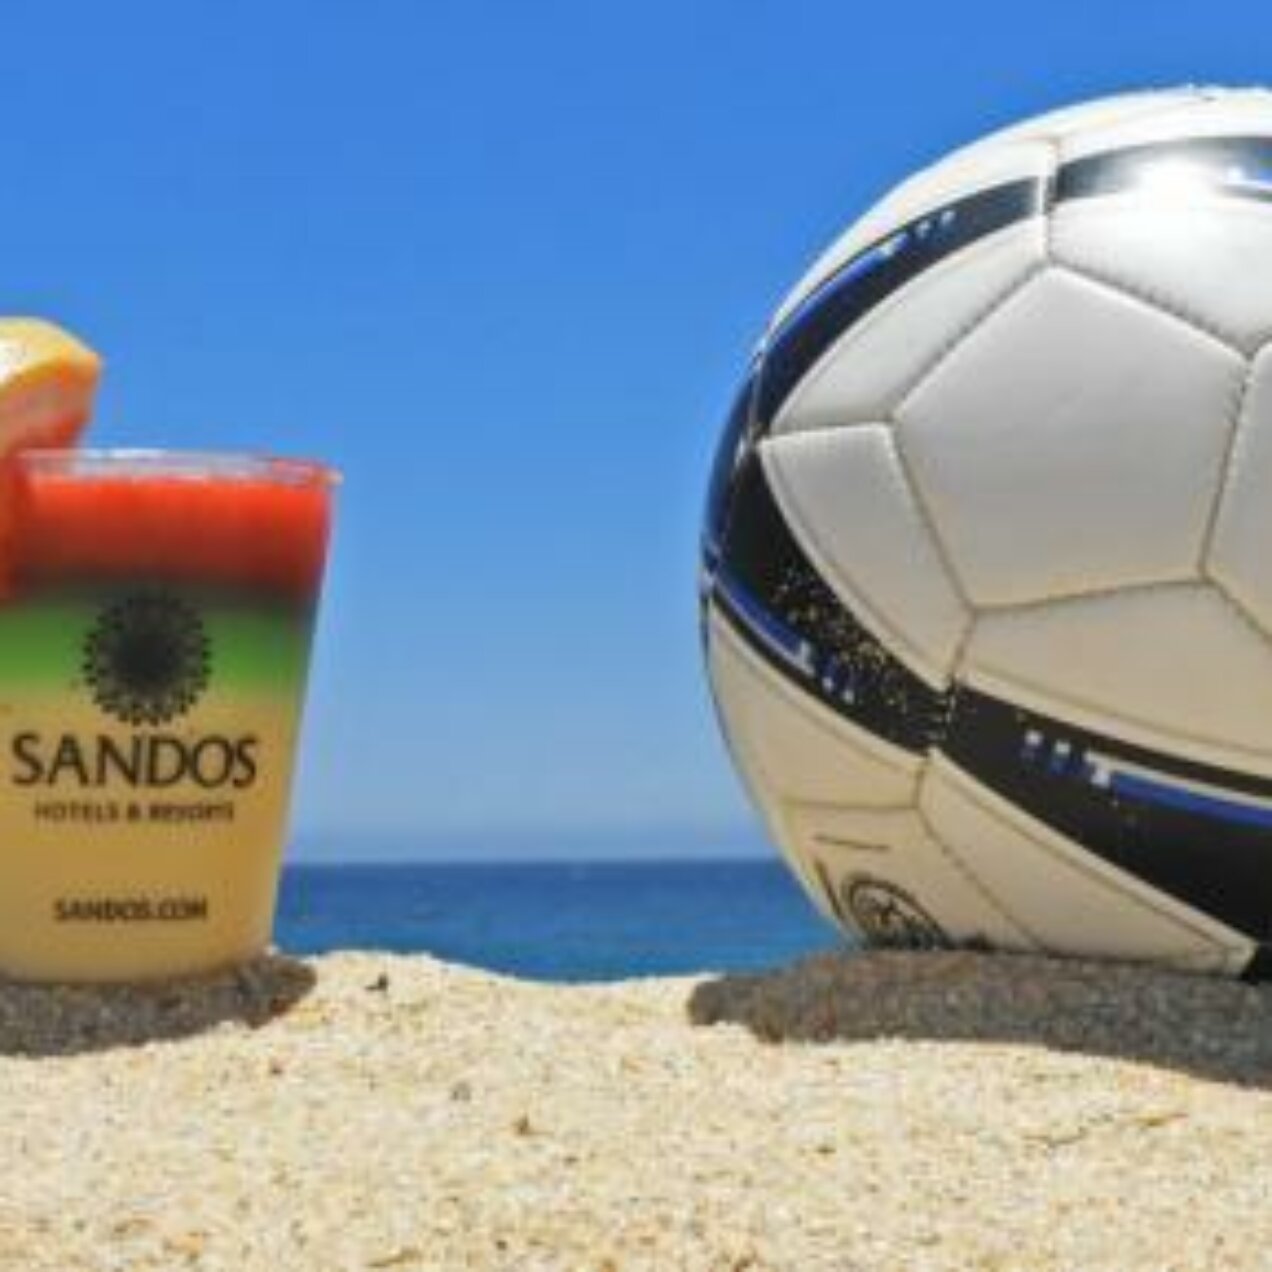 What’s Going On at Sandos for the 2022 World Cup?